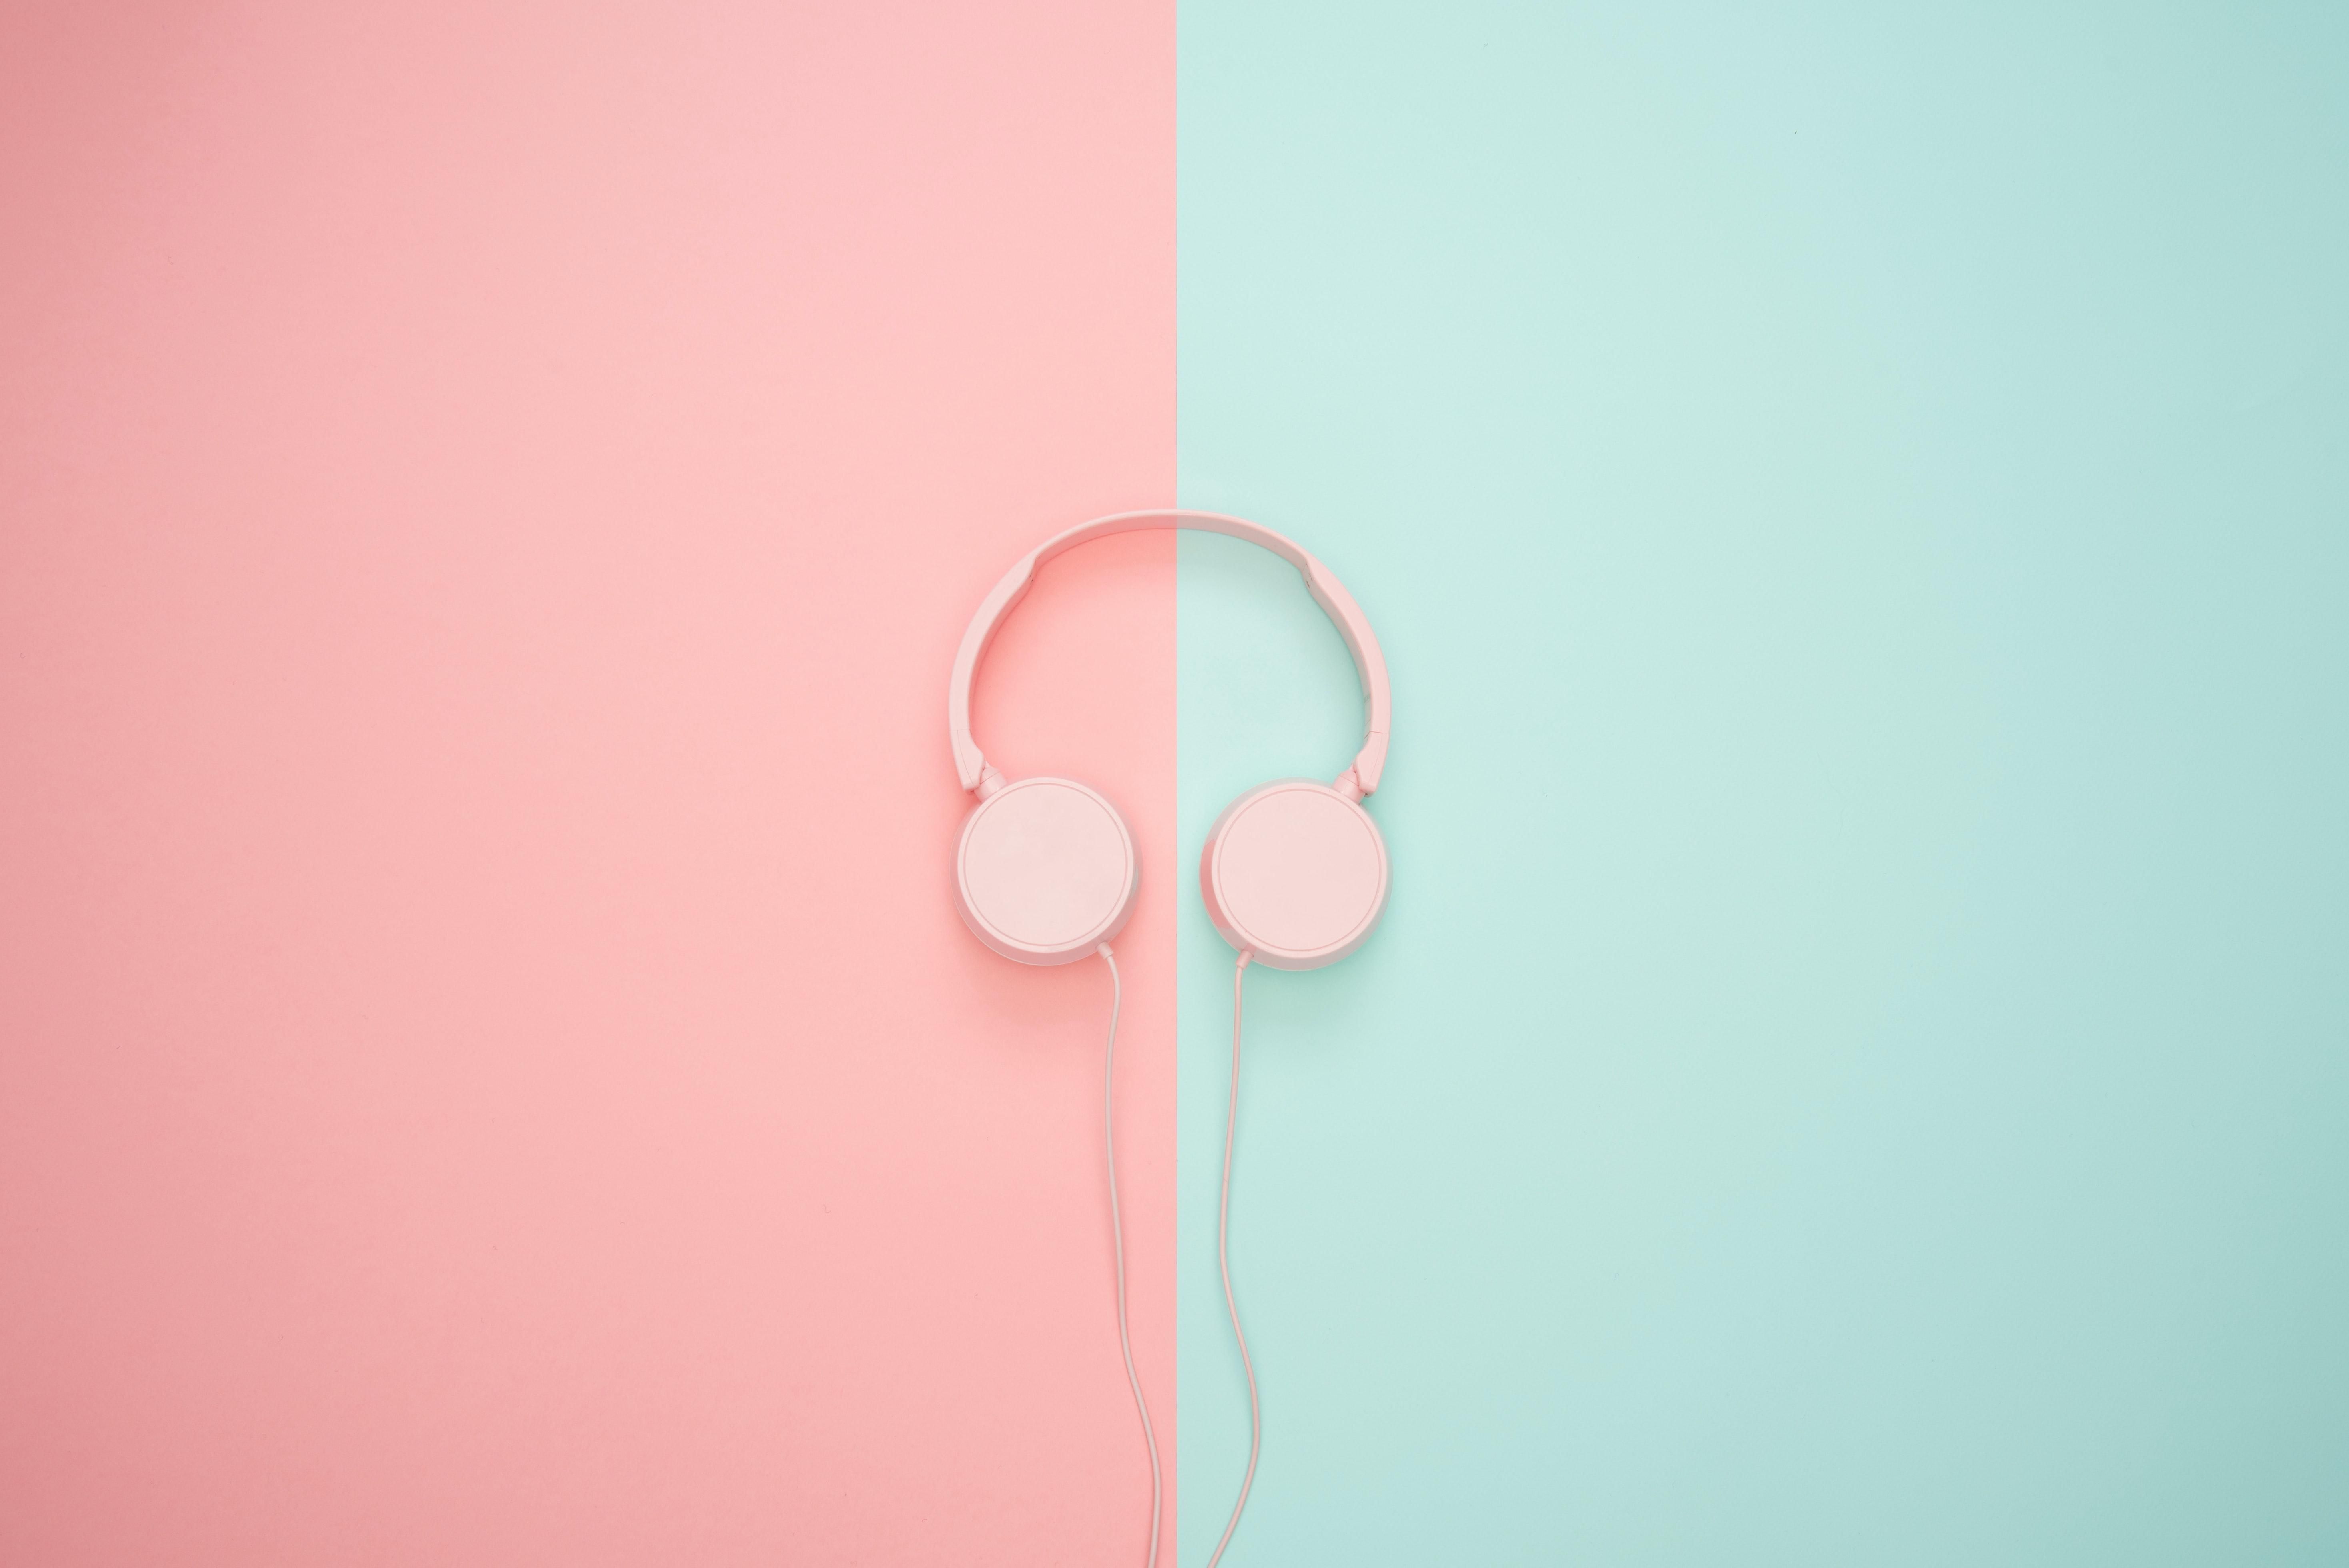 pink corded headphones against a pink and blue background.